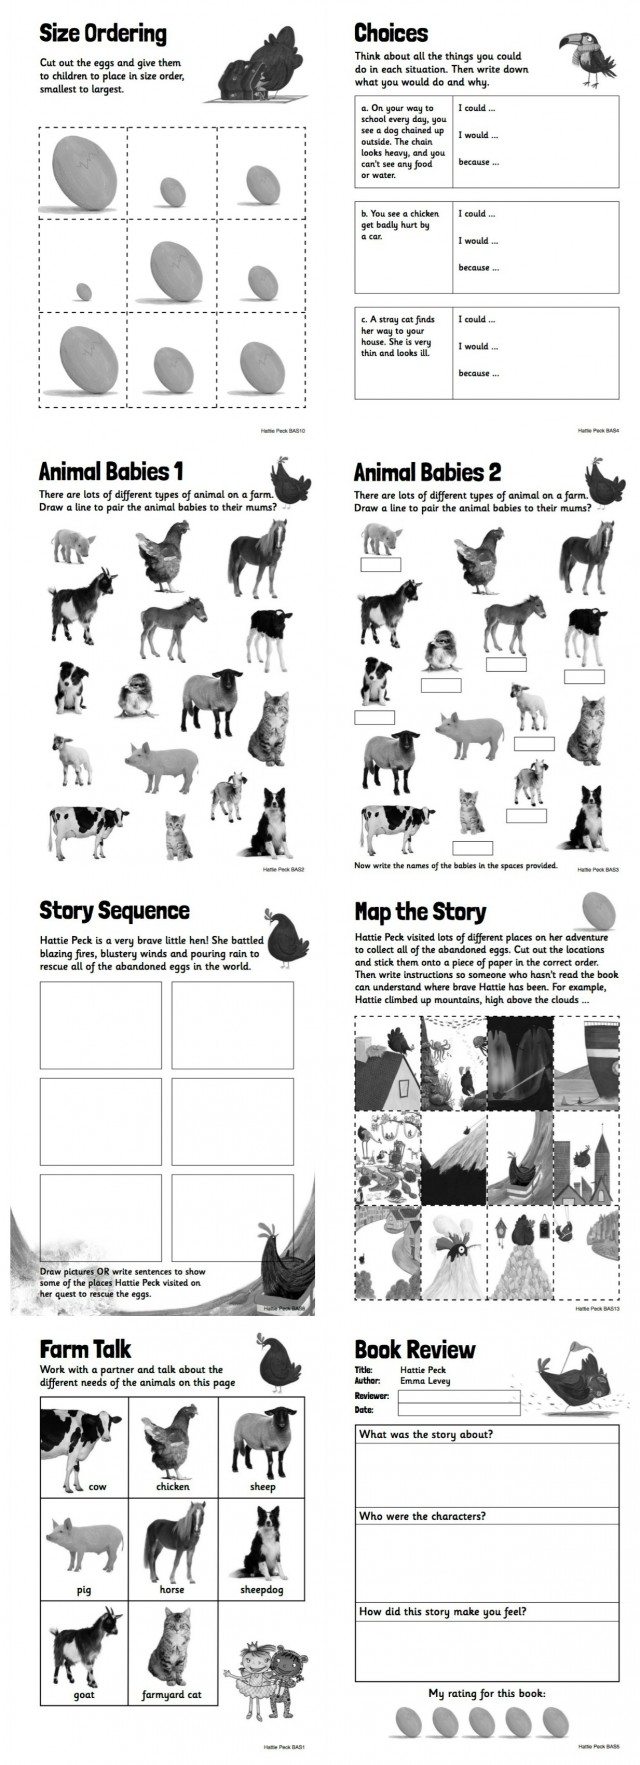 We have 17 free sheets in our learning pack to help motivate young readers from pre-school to kindergarten to primary school. 14 activity sheets, and 4 lesson plans, the ideas and activities touch on all areas of the curriculum to help both parents and teachers alike. Visit The Story Station for more great books and ideas to help kids have fun while learning.